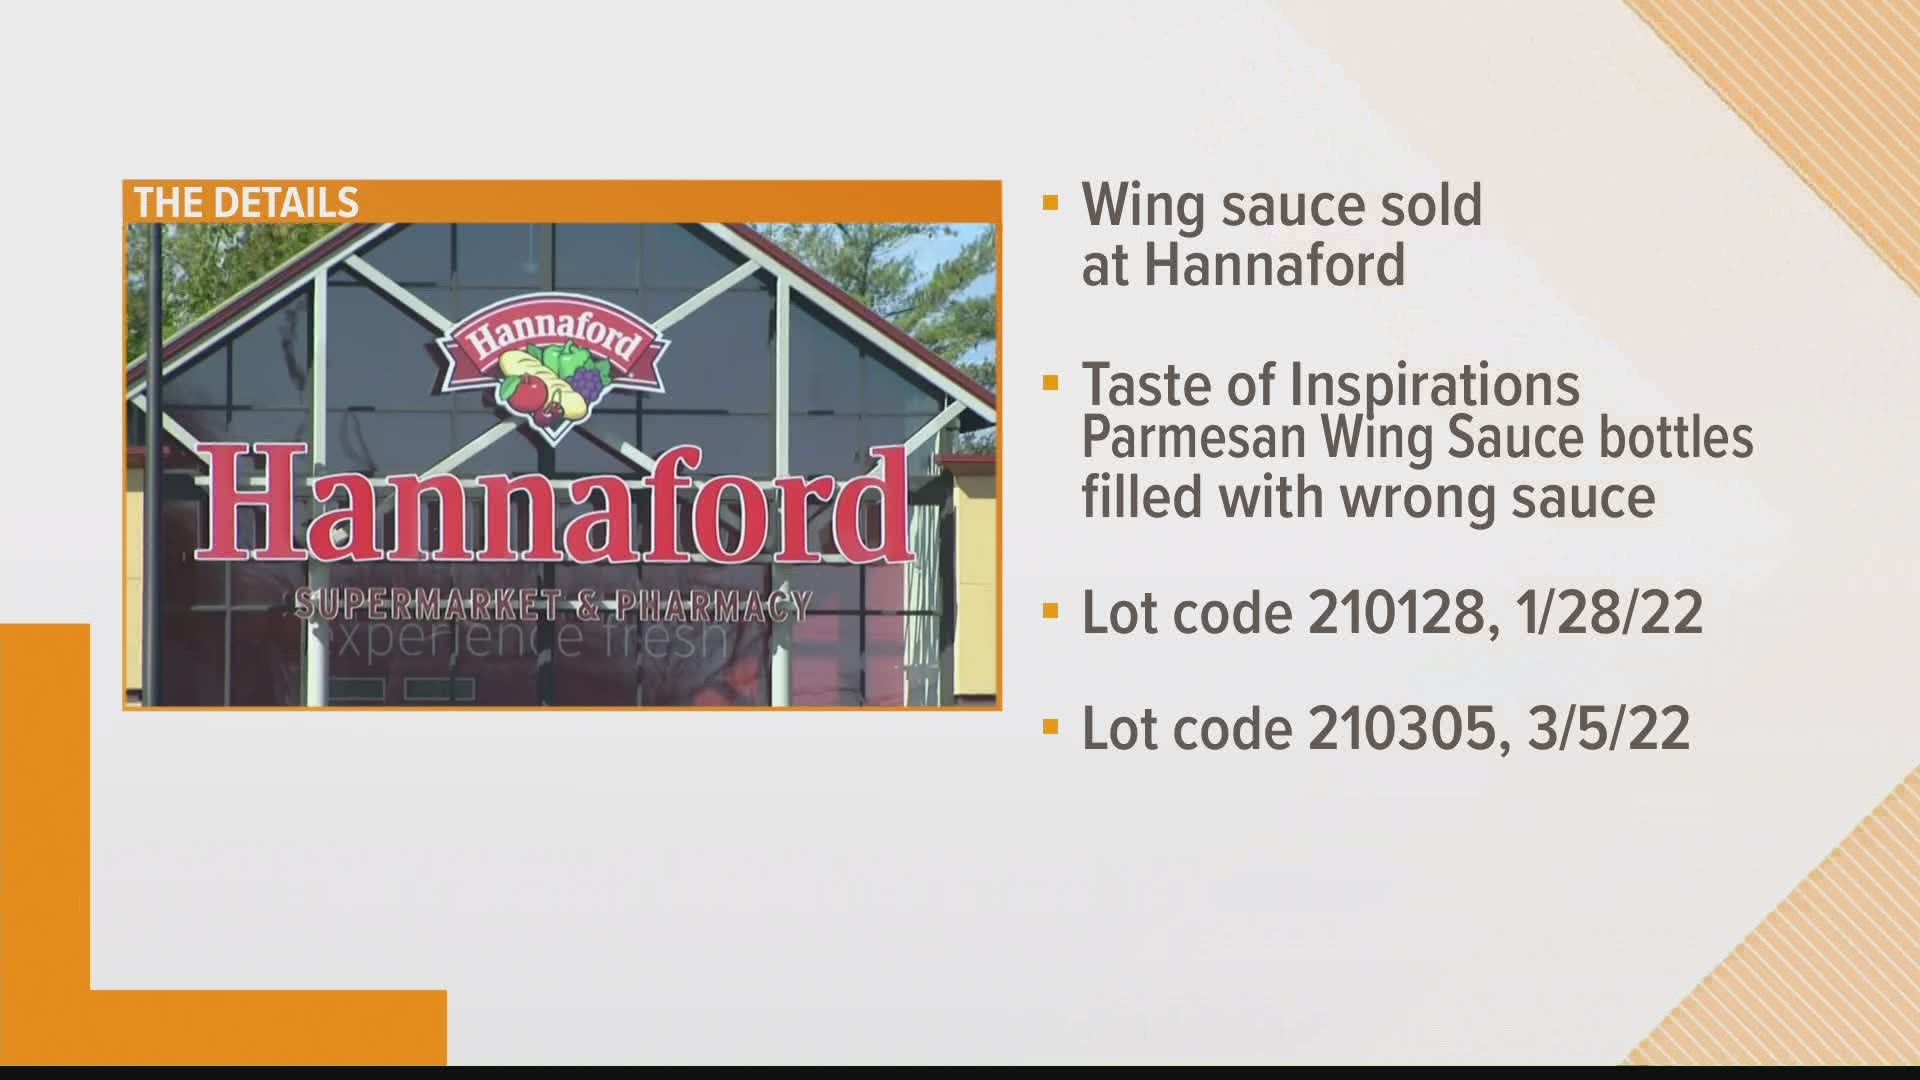 Hannaford is recalling two lots of wing sauce because they contain fish which is not listed on the bottles' labels.